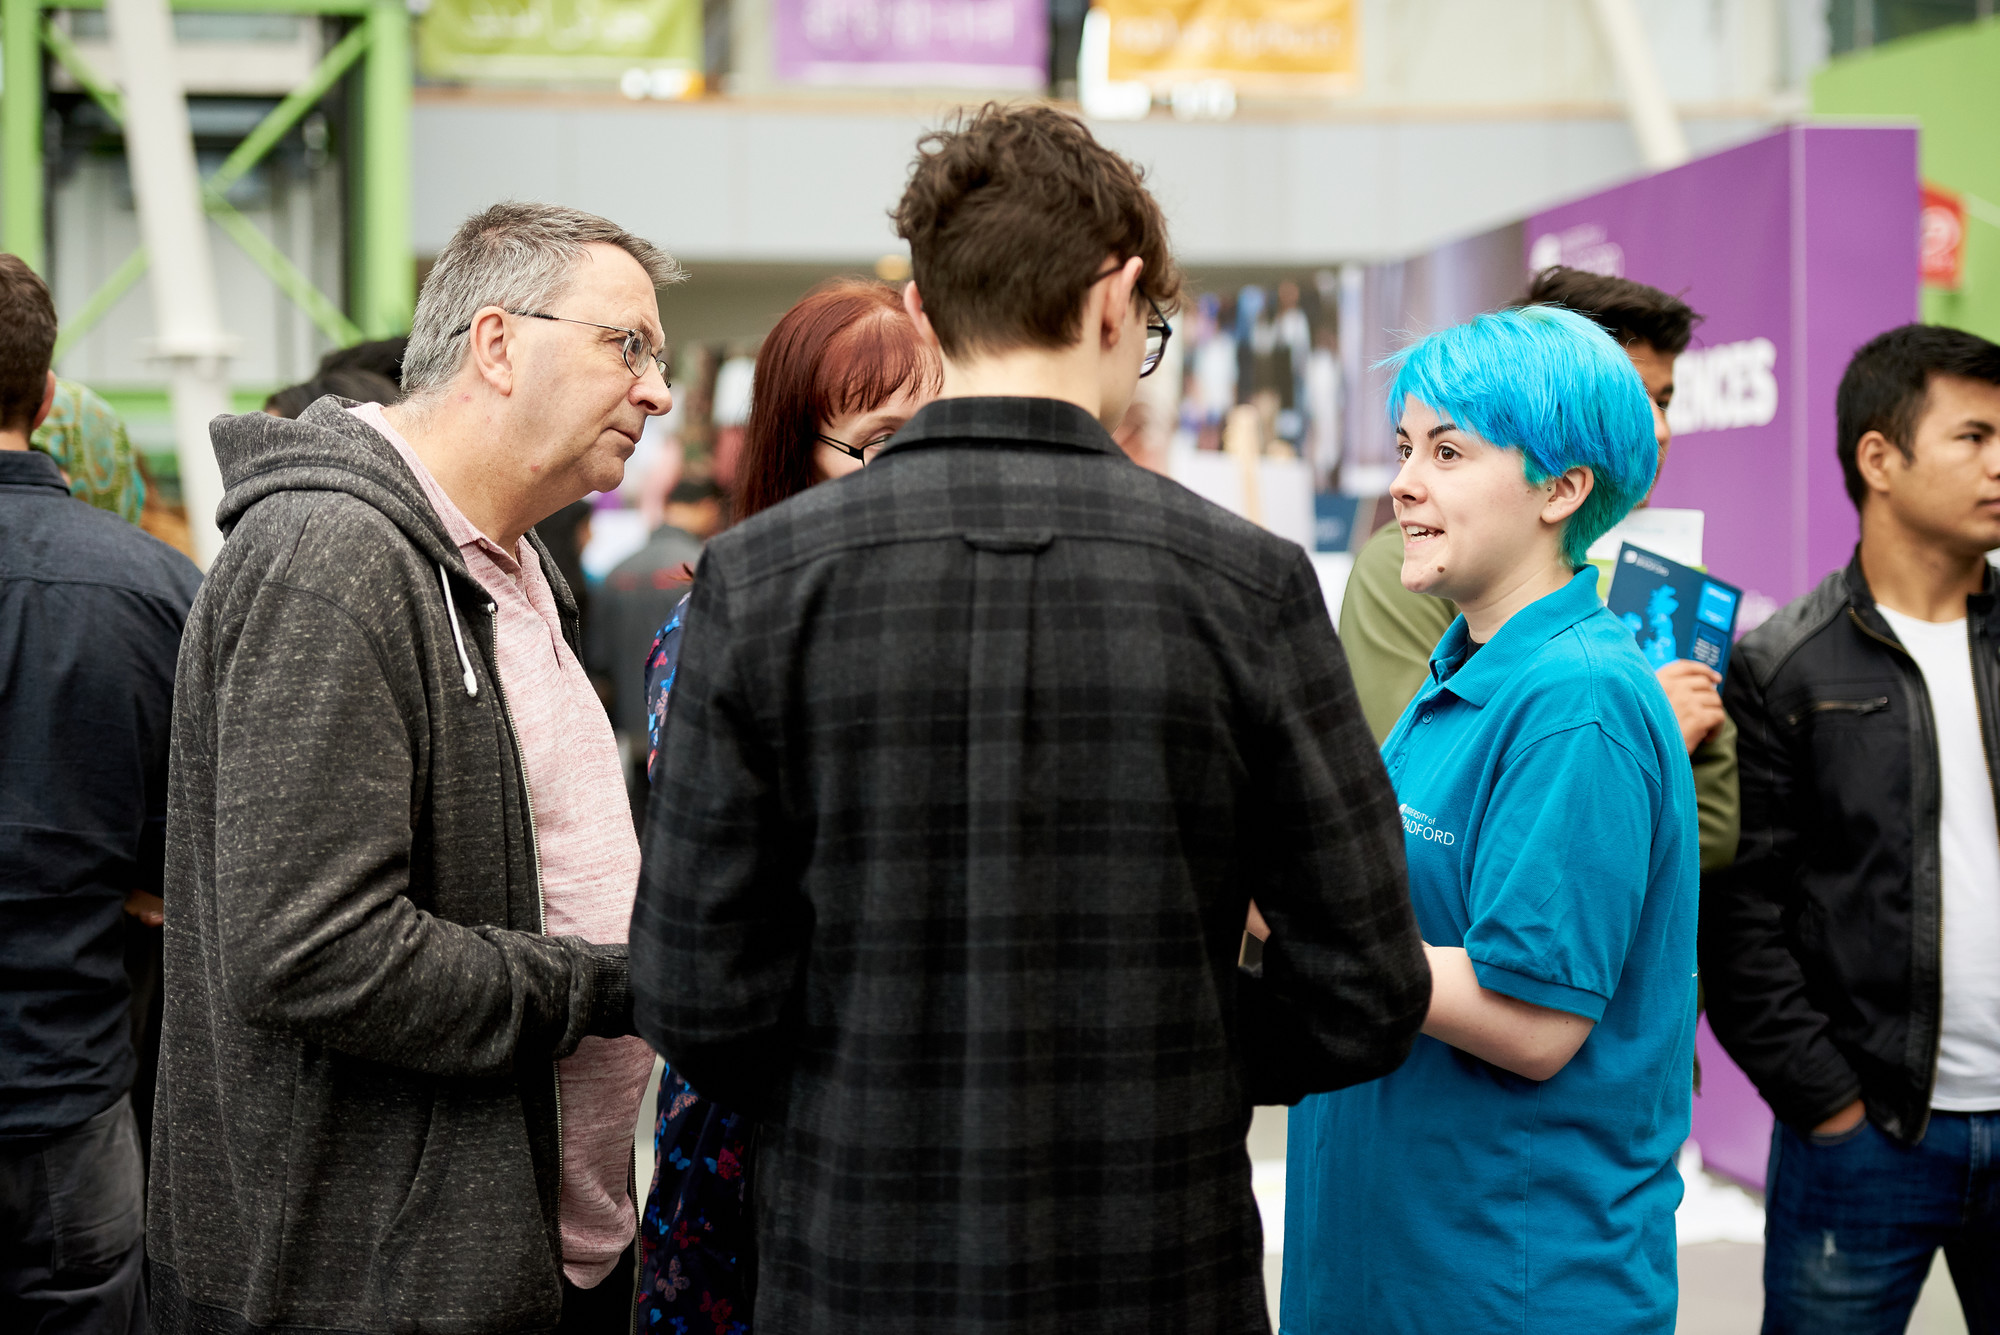 A University of Bradford student talking to visitors at an Open Day